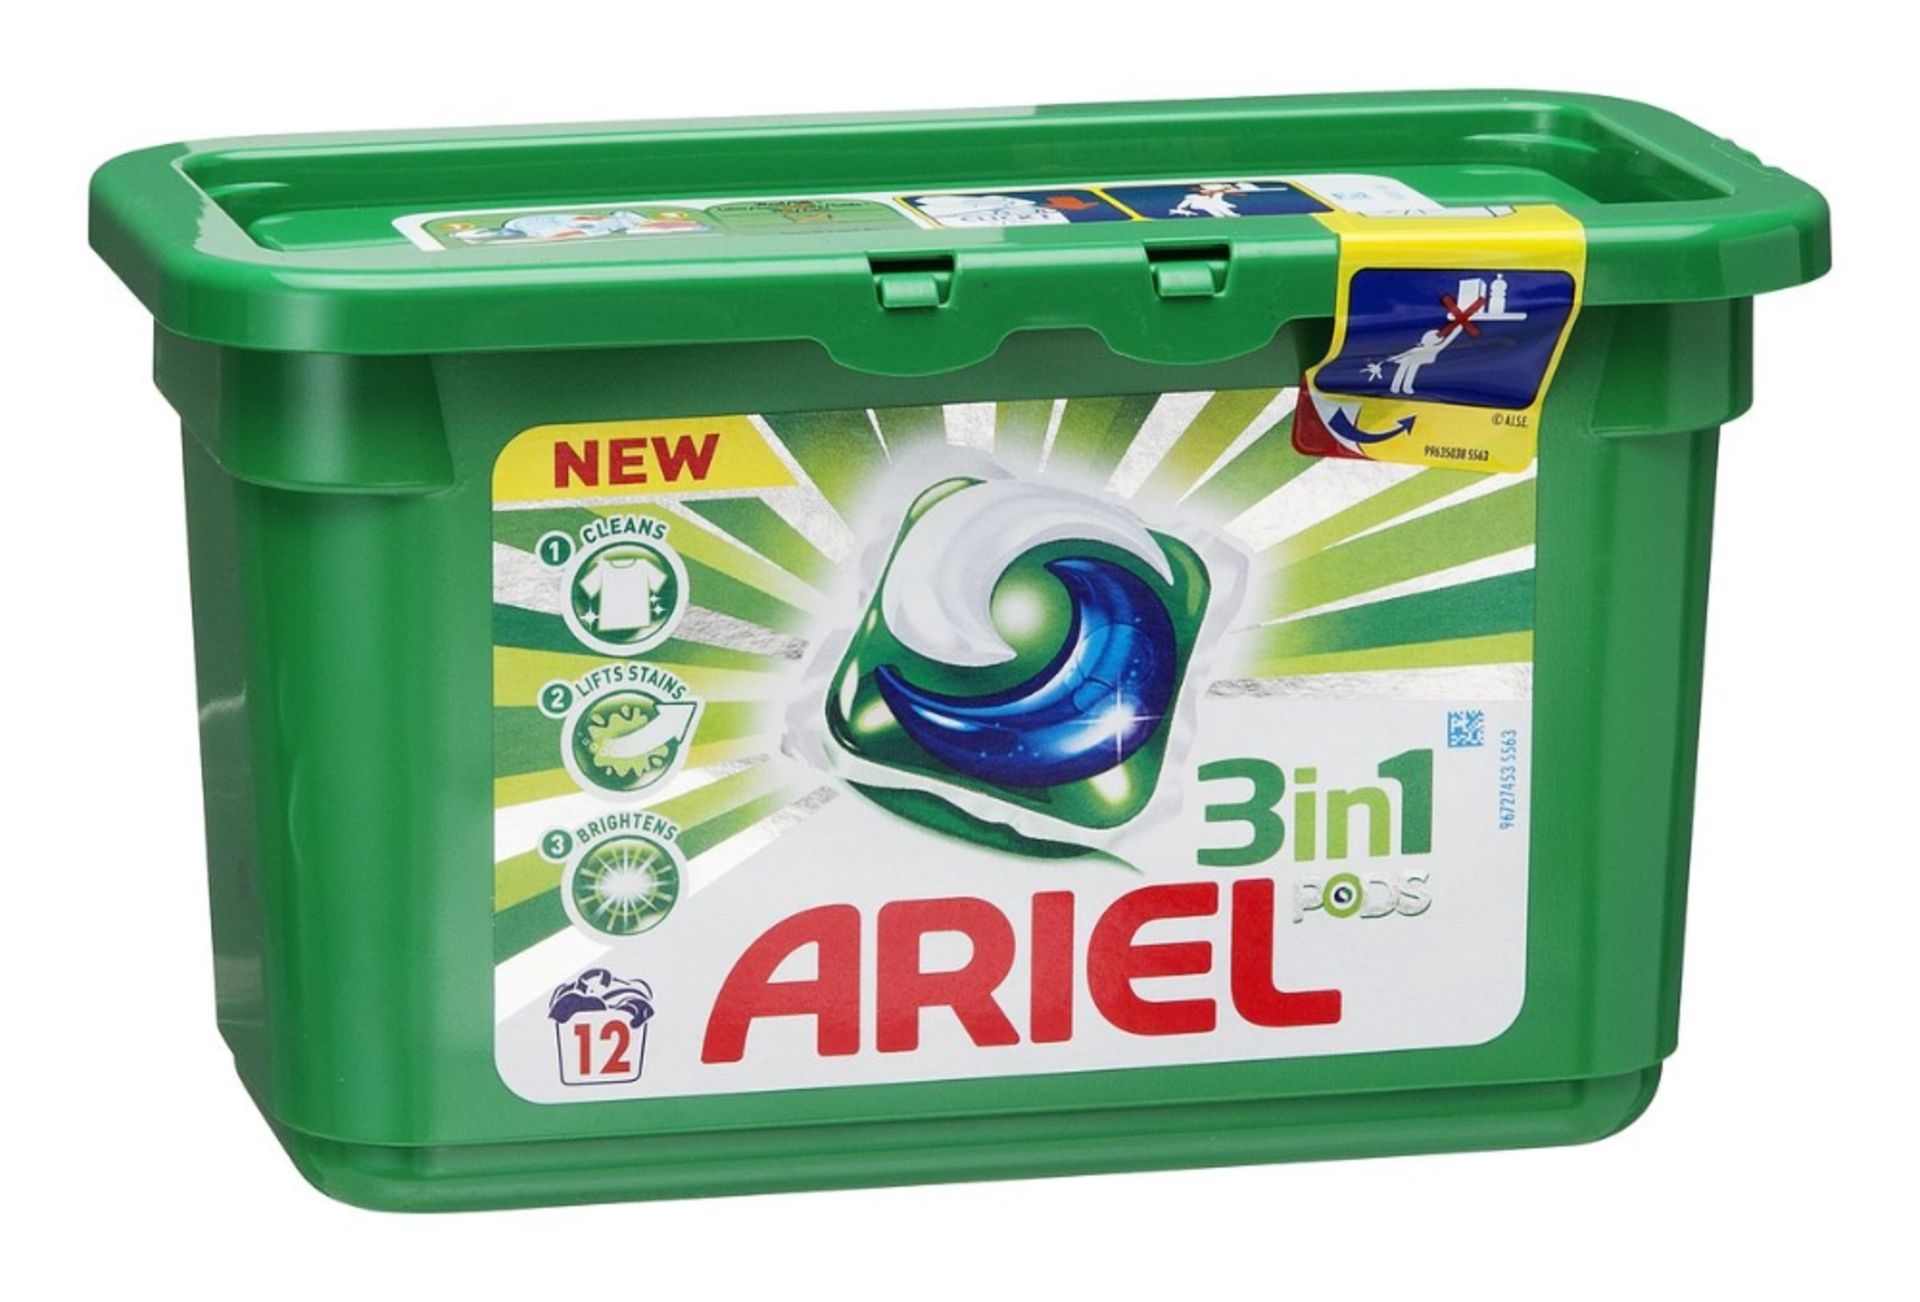 V Brand New Ariel 3 in 1 Pods 12 Wash Pack RRP8.99 X 12  Bid price to be multiplied by Twelve